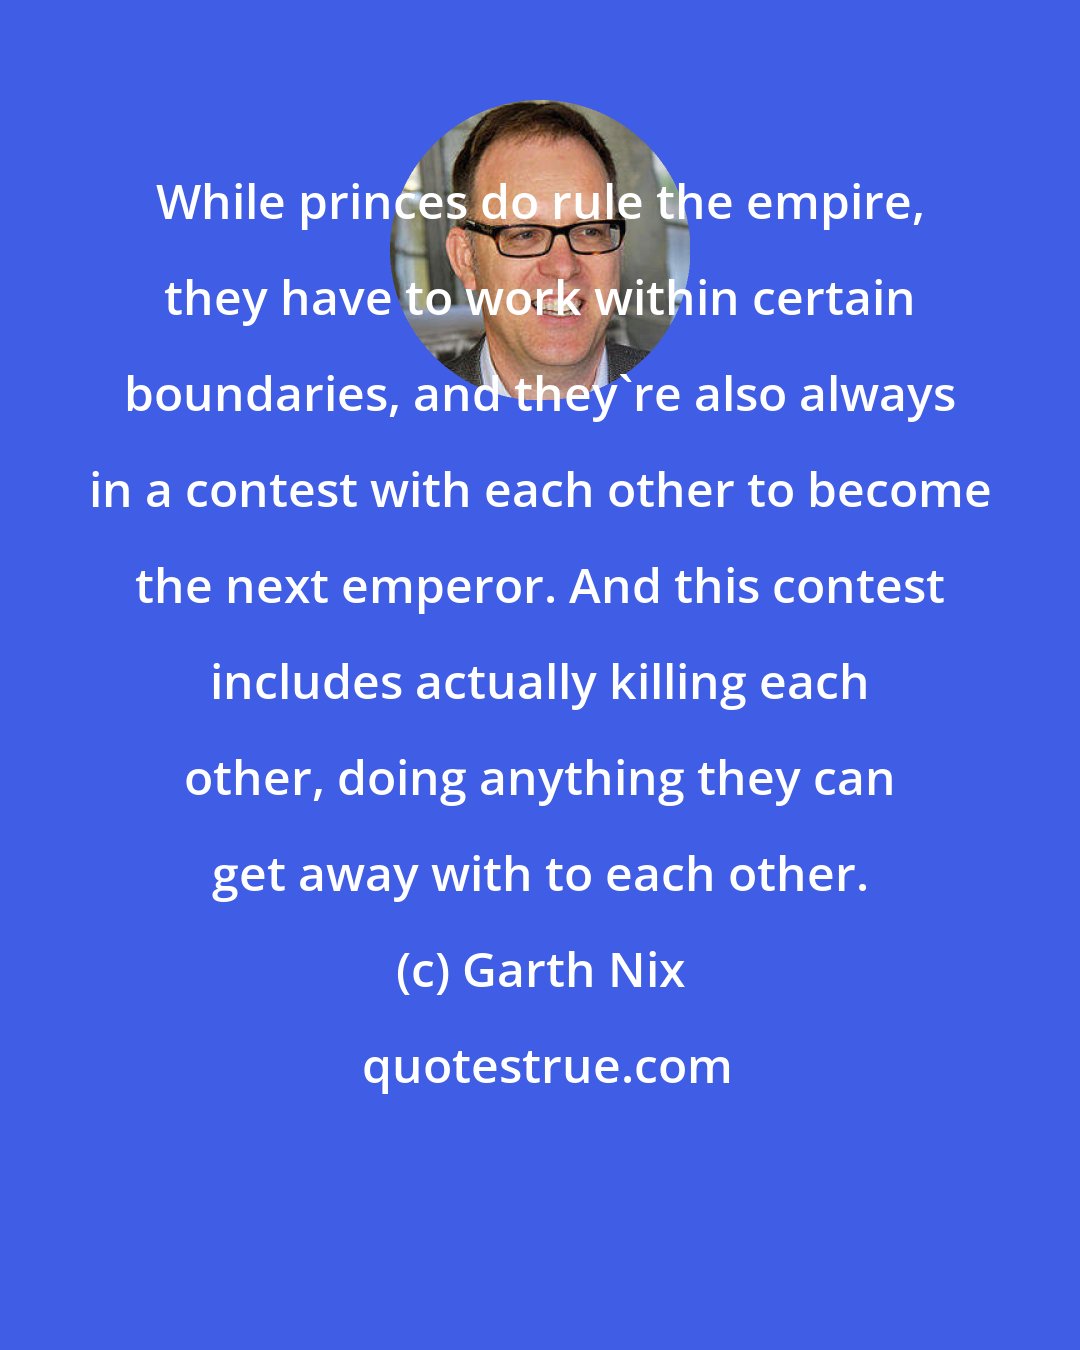 Garth Nix: While princes do rule the empire, they have to work within certain boundaries, and they're also always in a contest with each other to become the next emperor. And this contest includes actually killing each other, doing anything they can get away with to each other.